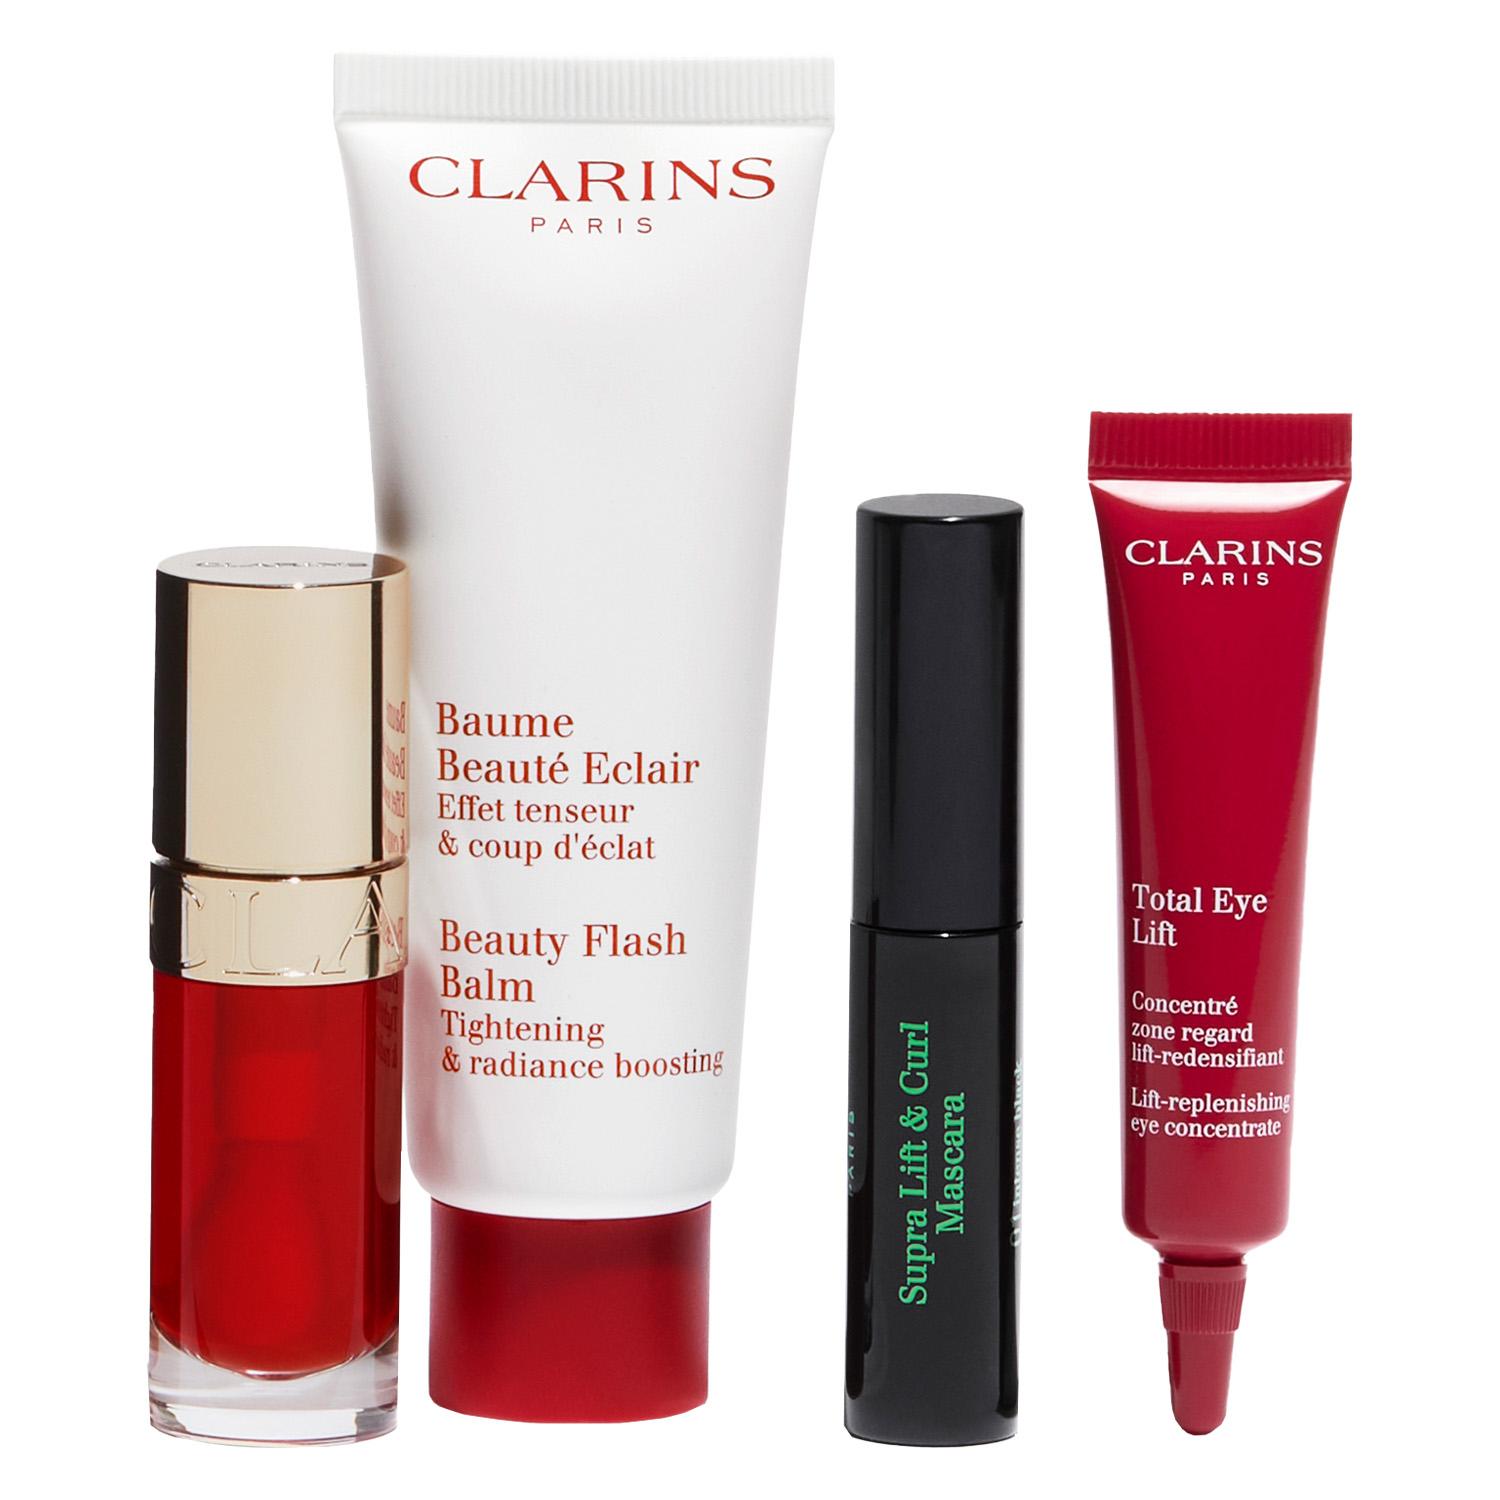 Clarins Specials - Iconic Offer